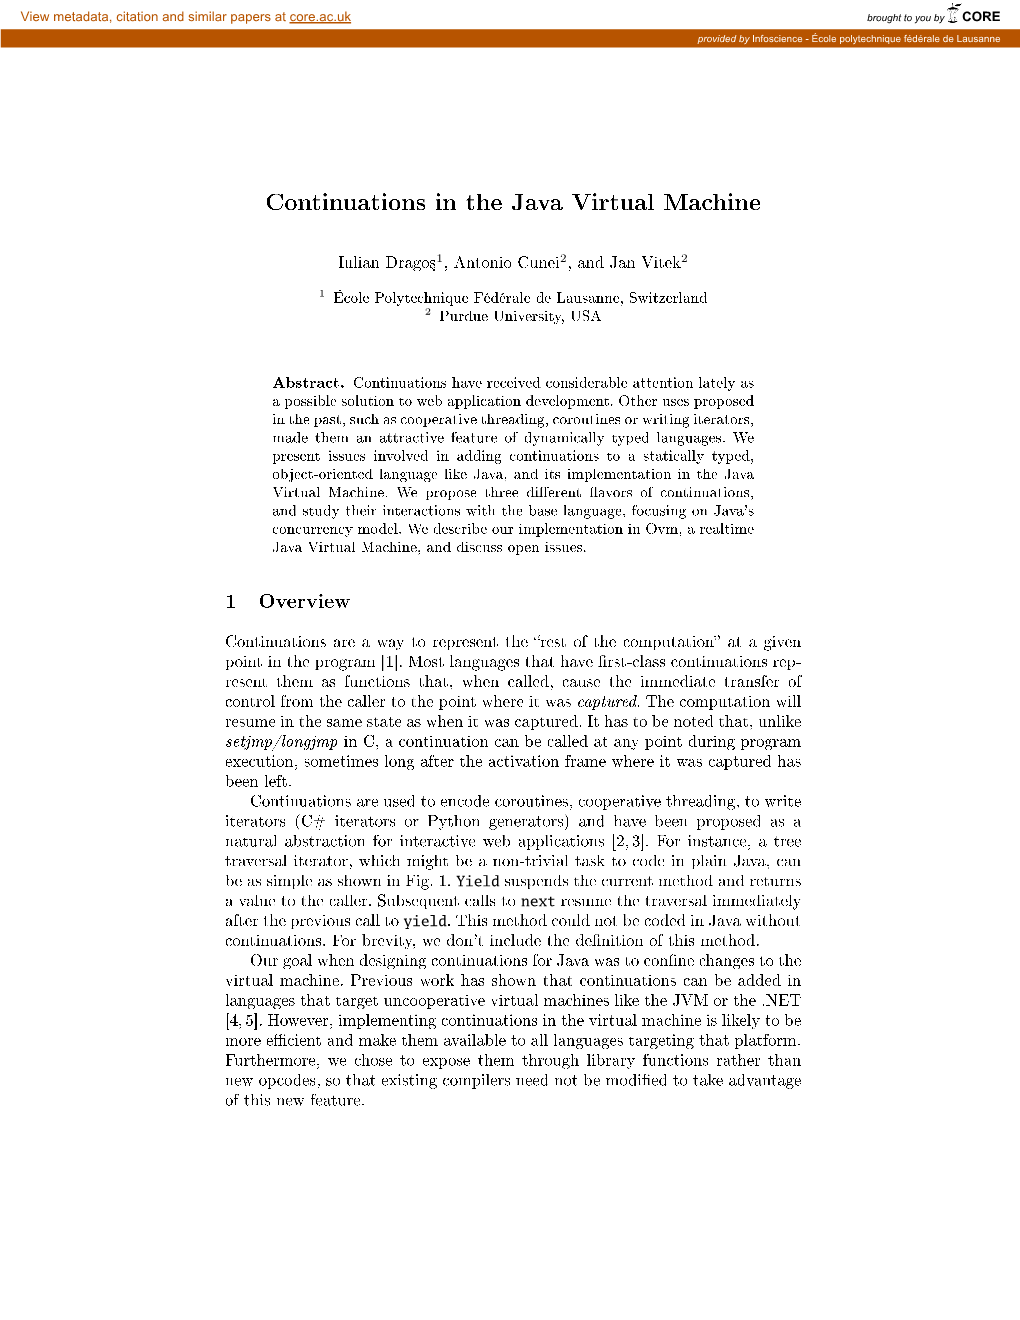 Continuations in the Java Virtual Machine